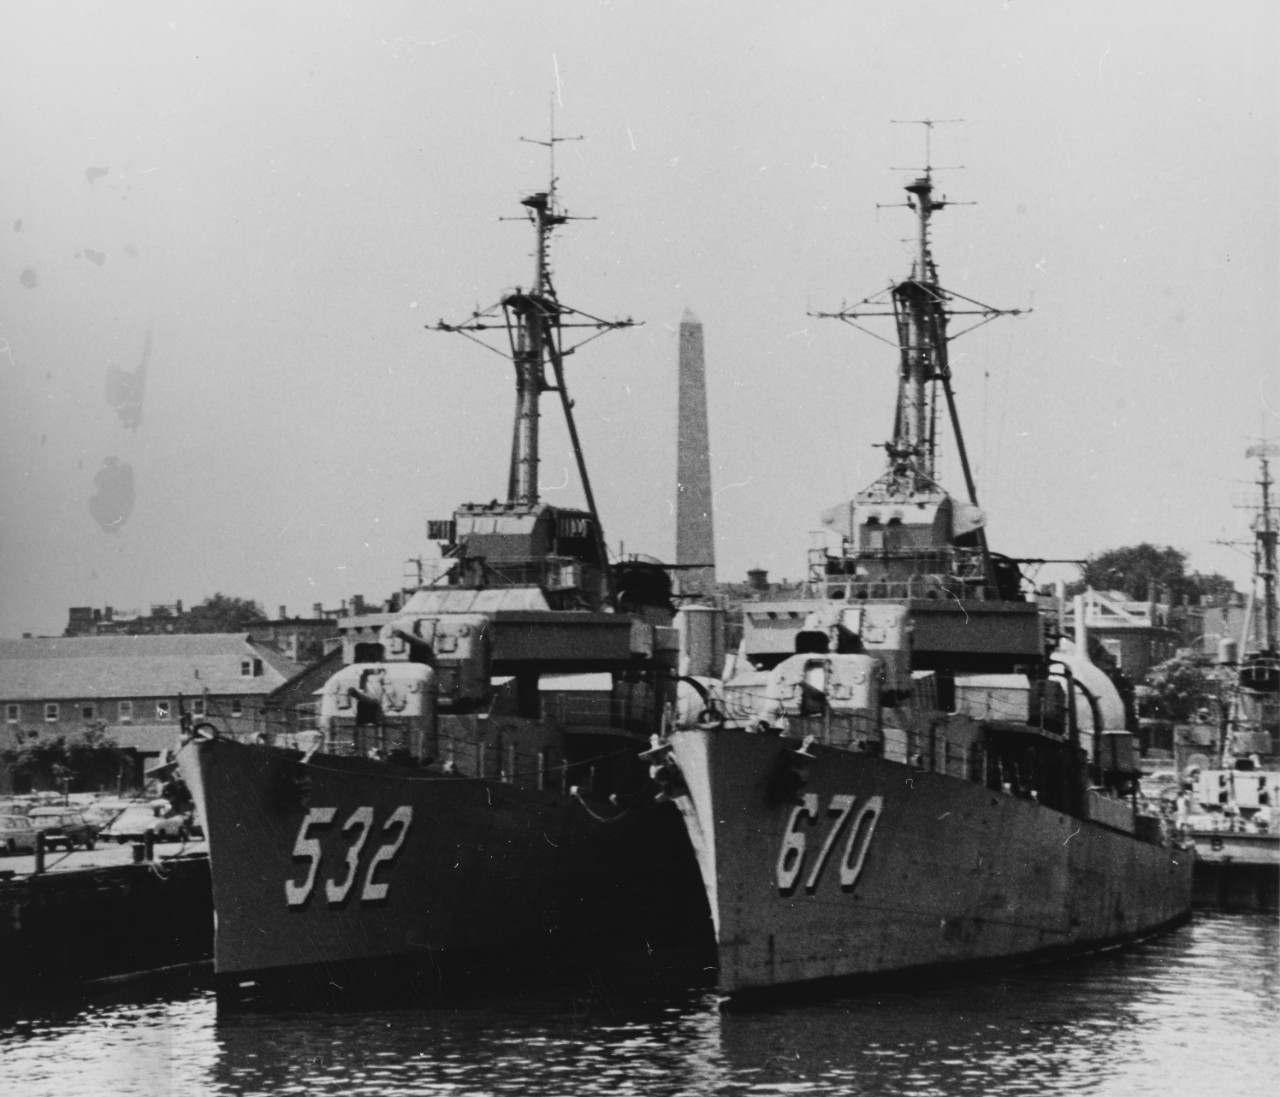 Heermann (pictured on the left) moored alongside Dortch (DD-670) at the Boston Naval Shipyard, shortly before both destroyers were transferred to Argentina in August 1961. Note the Bunker Hill Battle Monument in the background. (Naval History and...